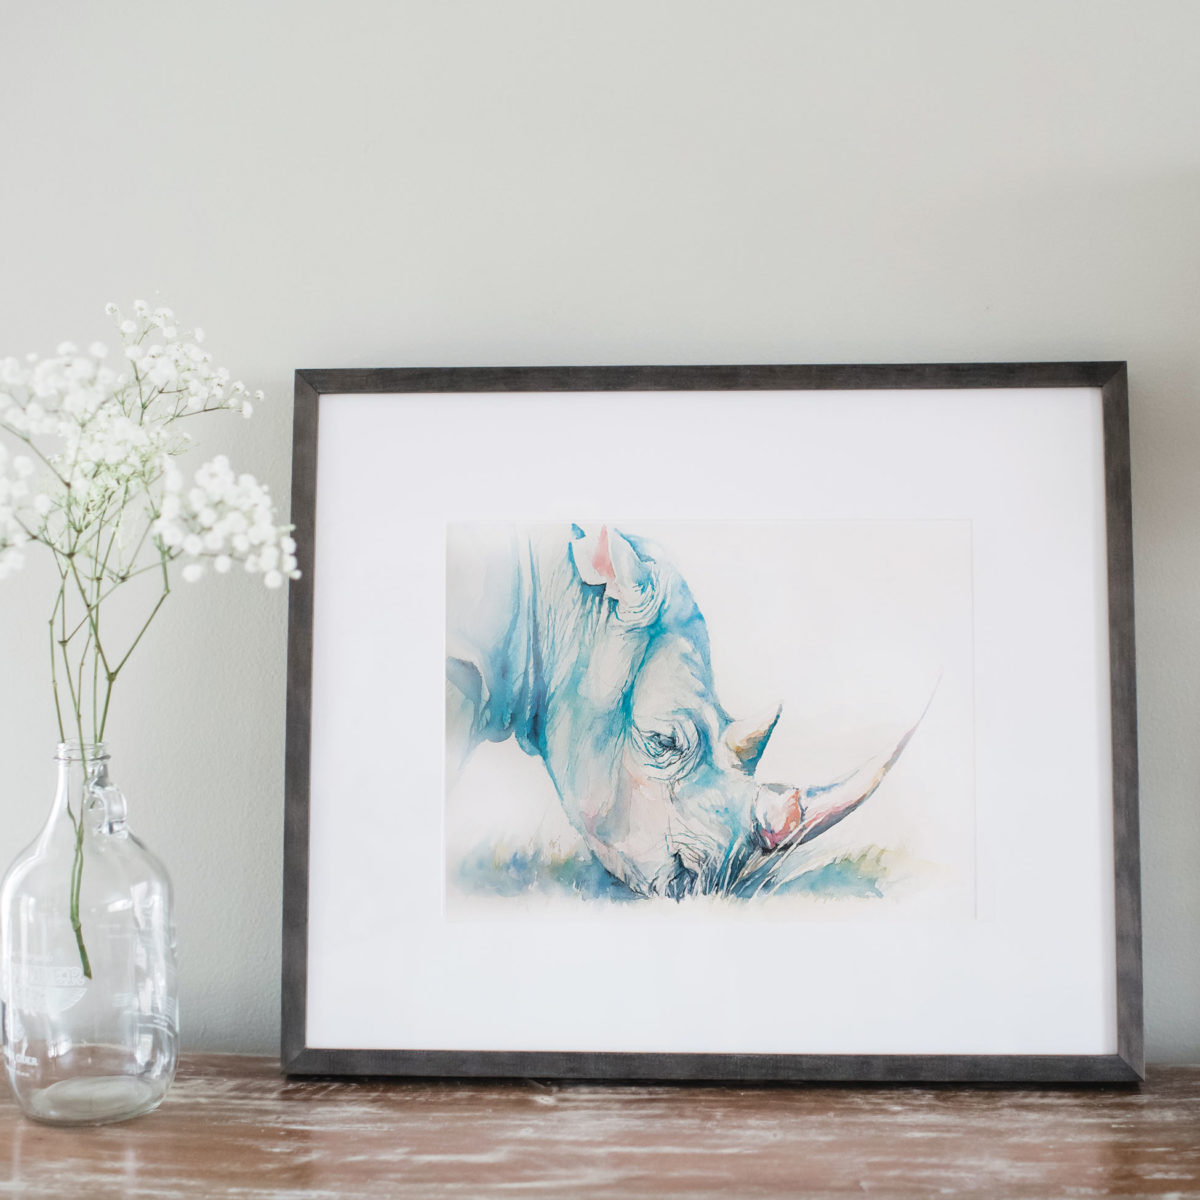 Watercolor of rhino in gray frame and staged with flowers